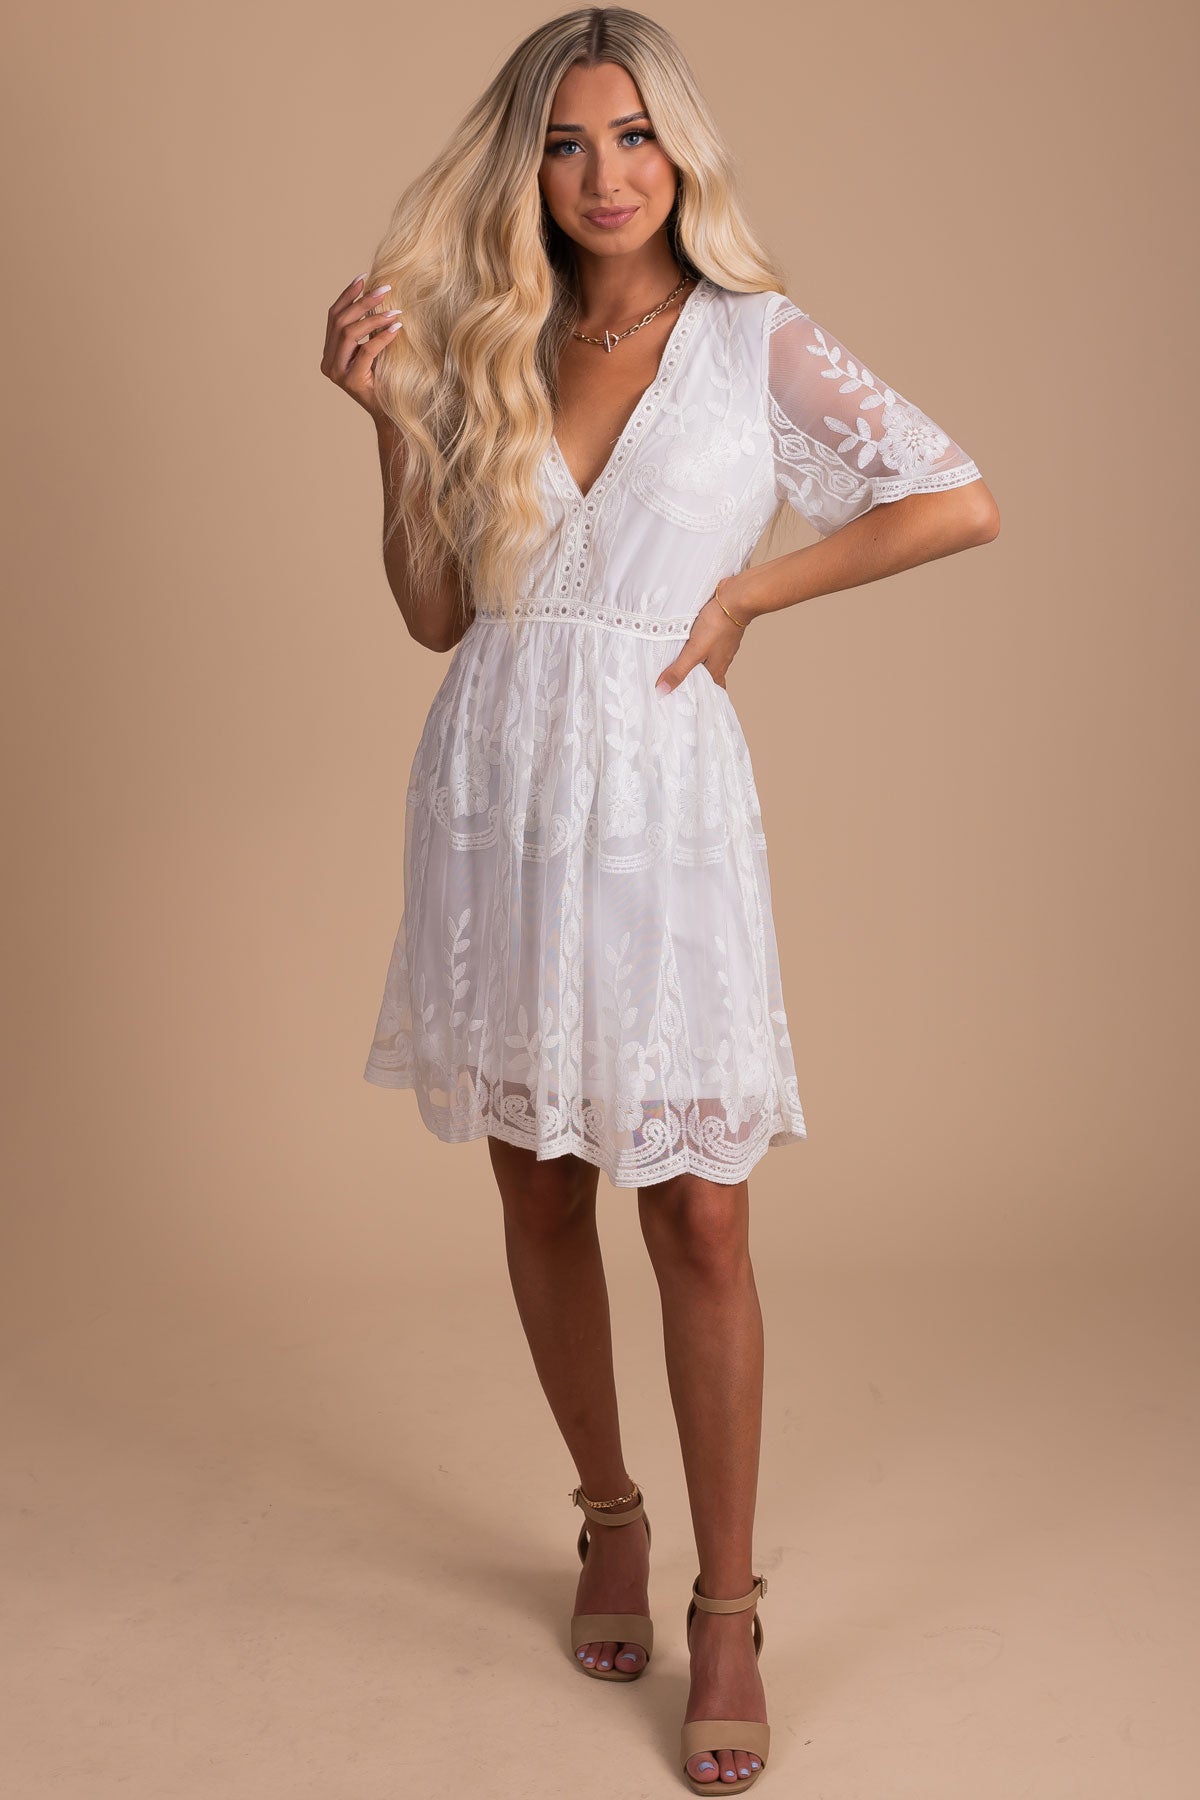 White Mini Dress with Extended Crochet Lace Overlay Boho Chic Boutique